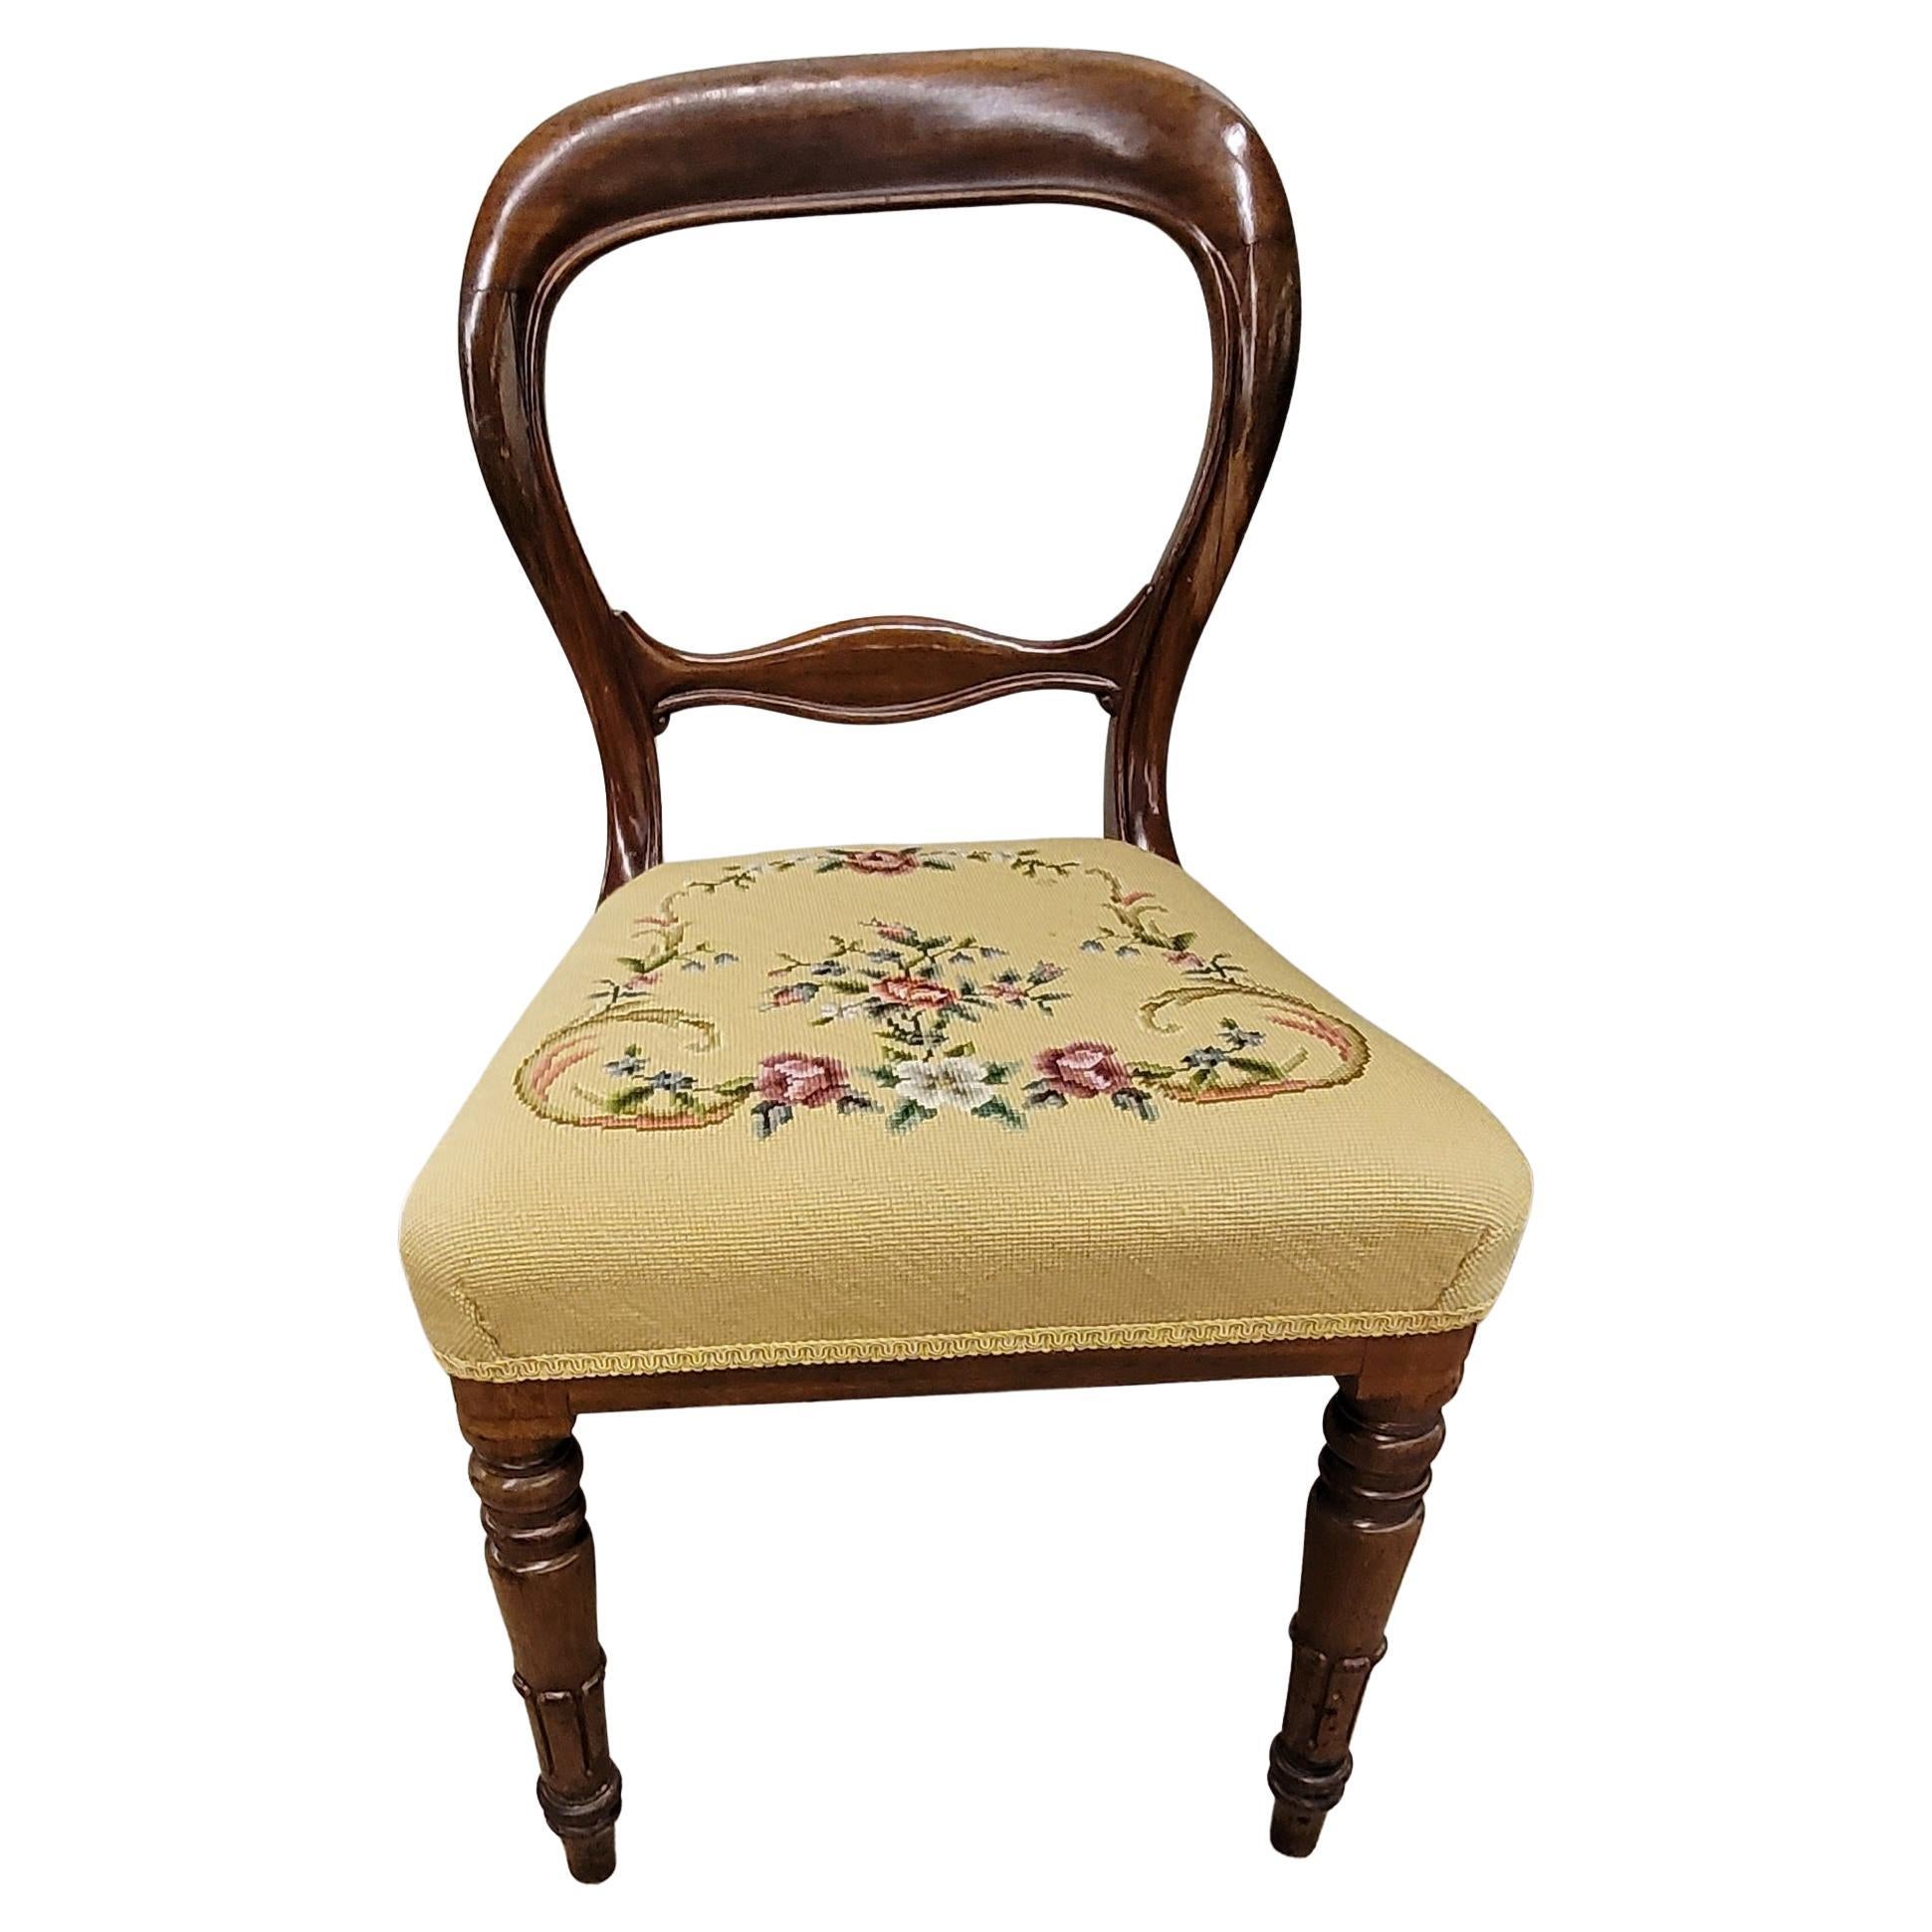 A beautiful set of five Victorian Mahogany and custom needlepoint upholstered side chairs in great condition. Chairs have been recently refinished and seat redone with new custom needlepoint work for each individual chair. The chairs look fabulous.